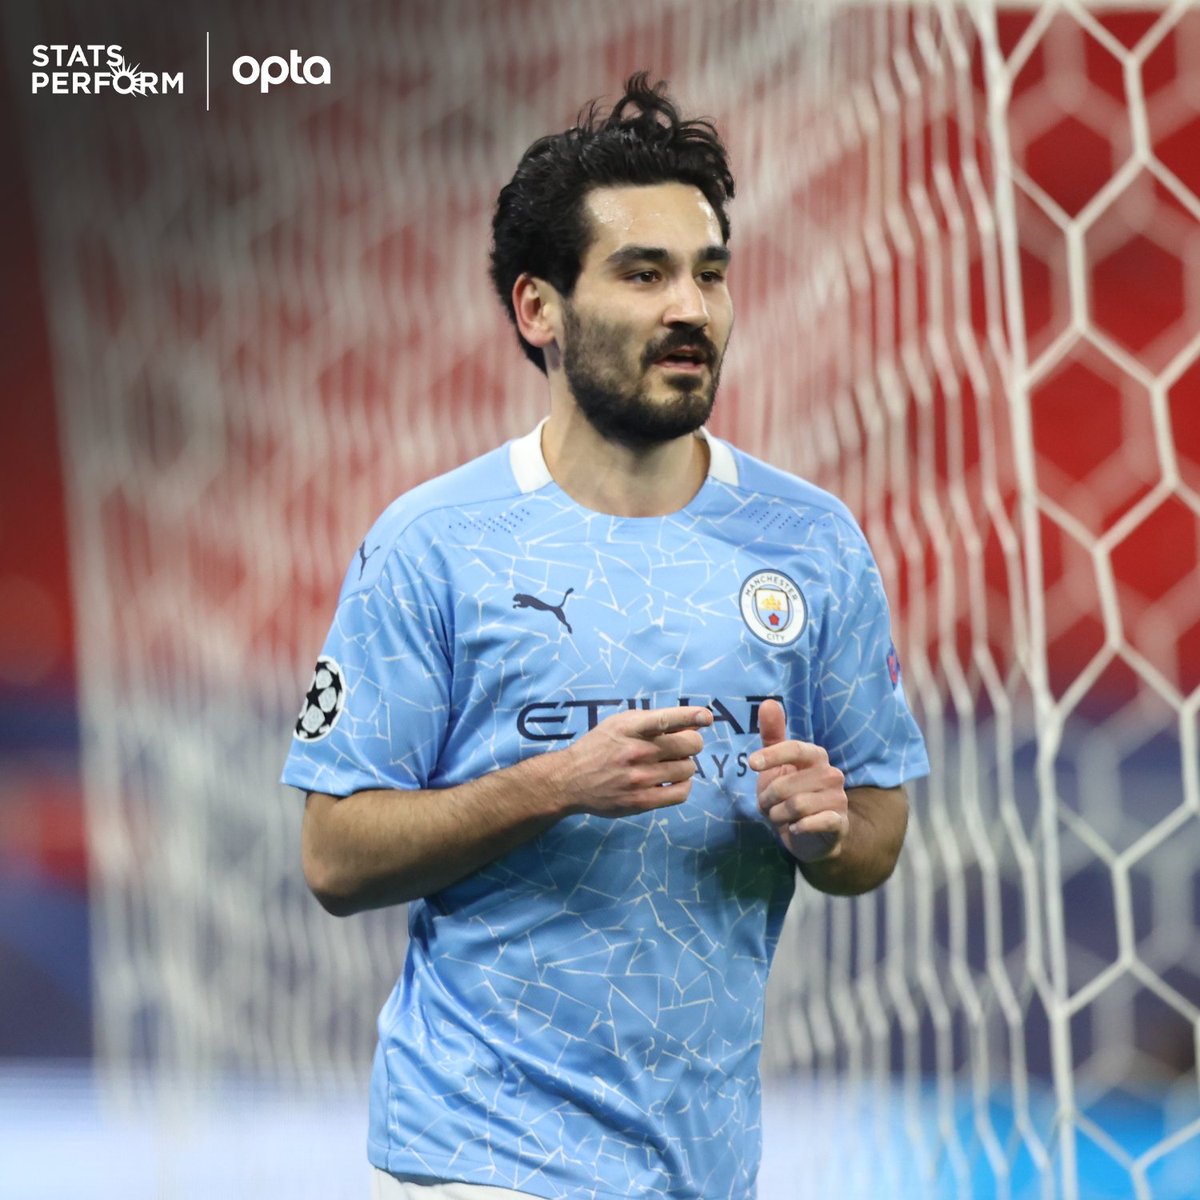 Optajoe 15 Not Only Is Ilkay Gundogan Manchester City S Top Scorer This Season With 15 Goals He Is Now The Top Scoring German Player Within The Top Five European